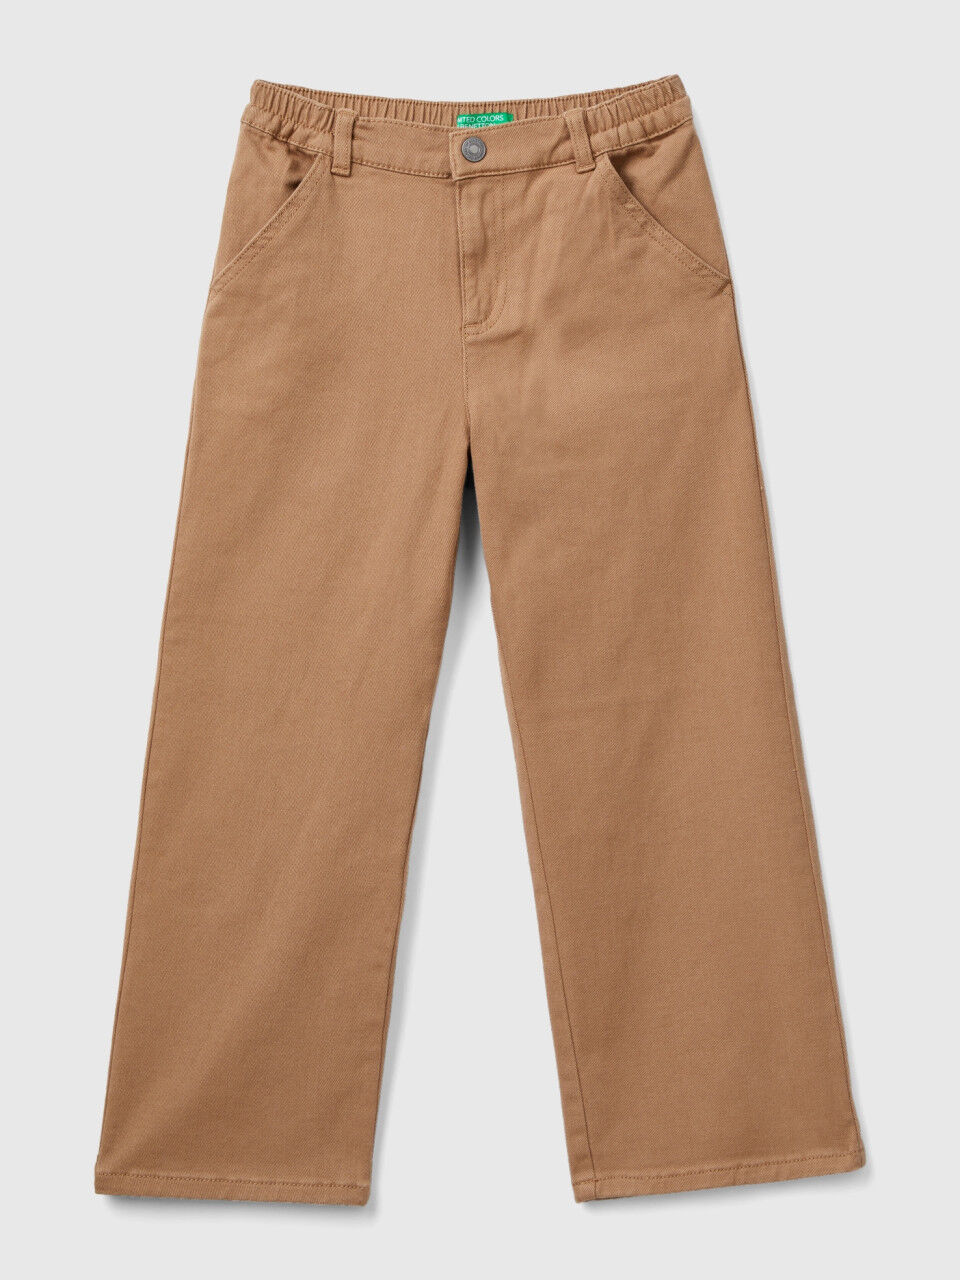 Wide Corduroy Trousers for Girls - brown medium solid, Girls